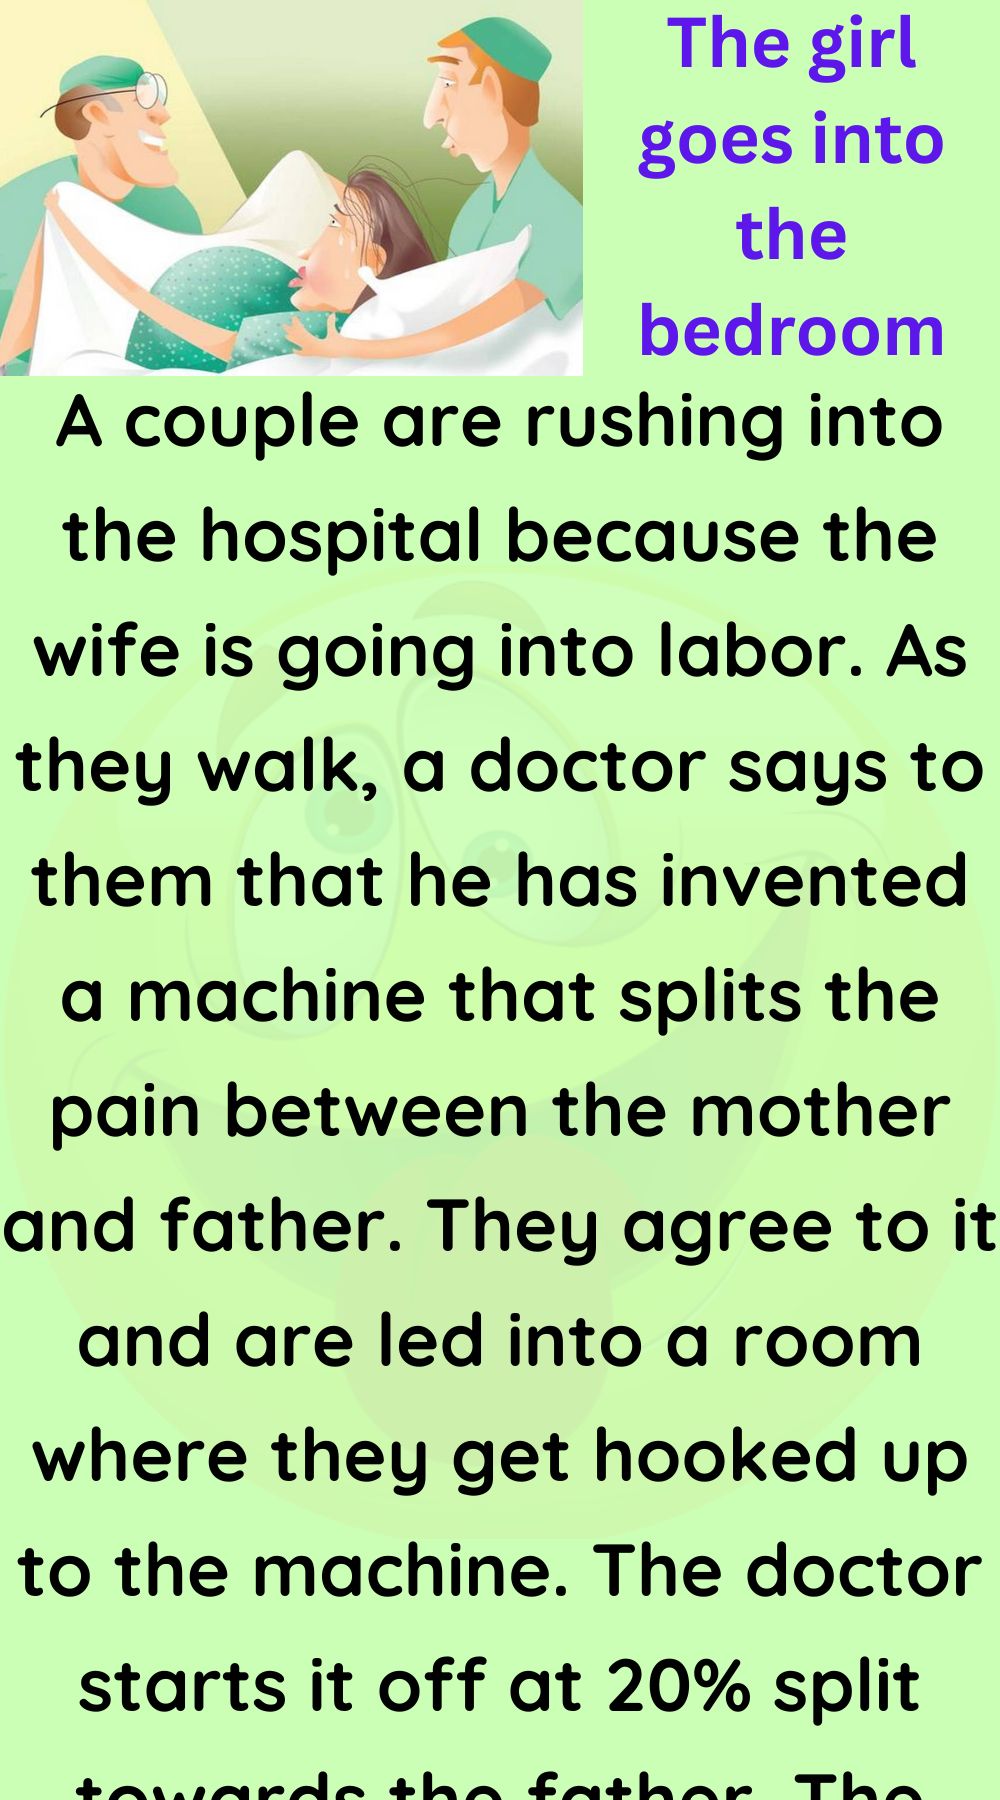 The wife is going into labor - Funny Story